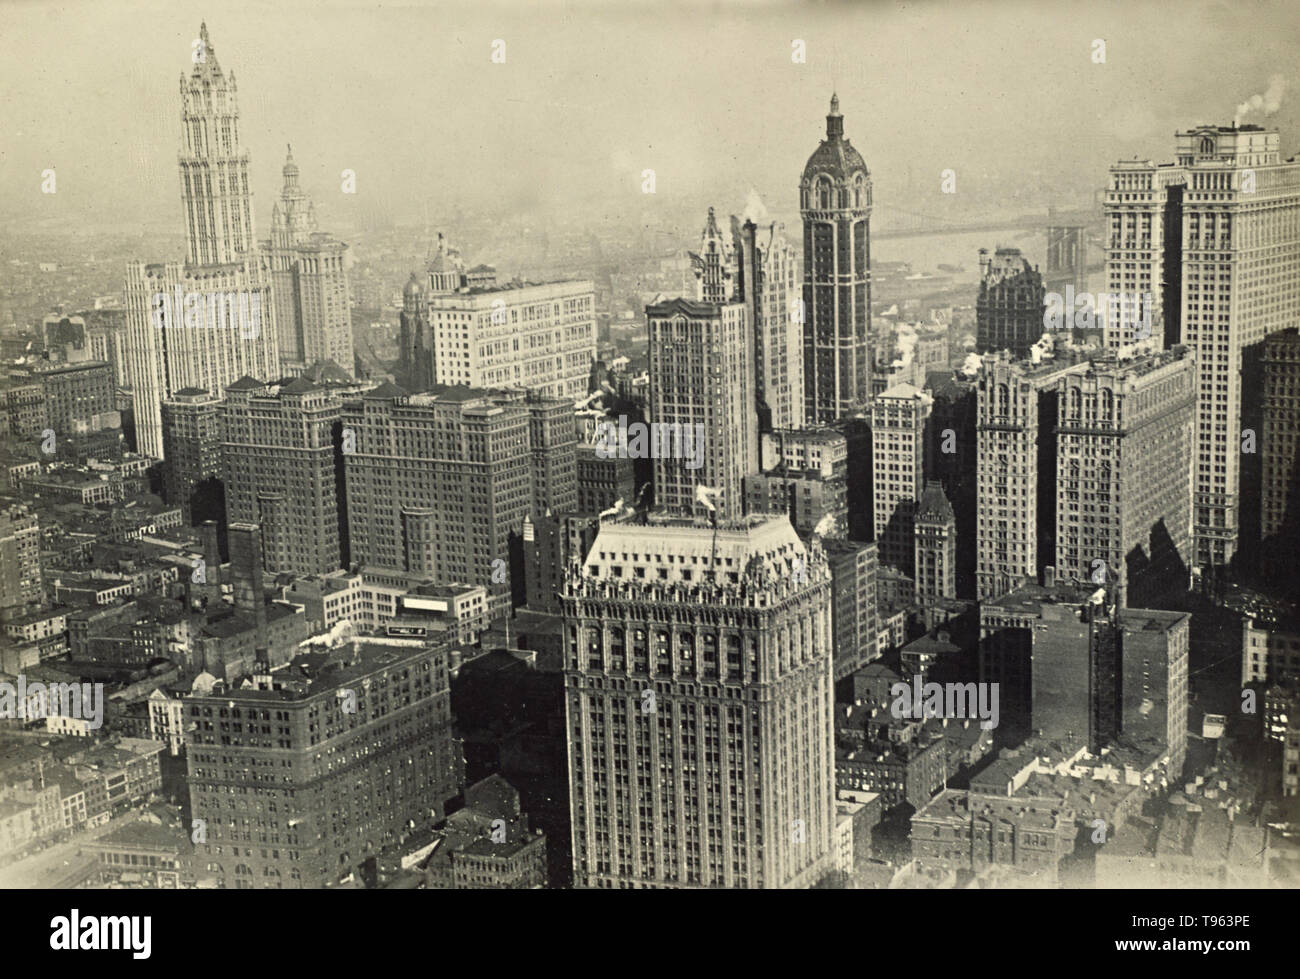 Aerial of New York's financial district, showing the Woolworth building at far left. The Brooklyn Bridge can be seen in the distance. Fedele Azari (Italian, 1895 - 1930); Italy; 1914 - 1929; Gelatin silver print. Stock Photo